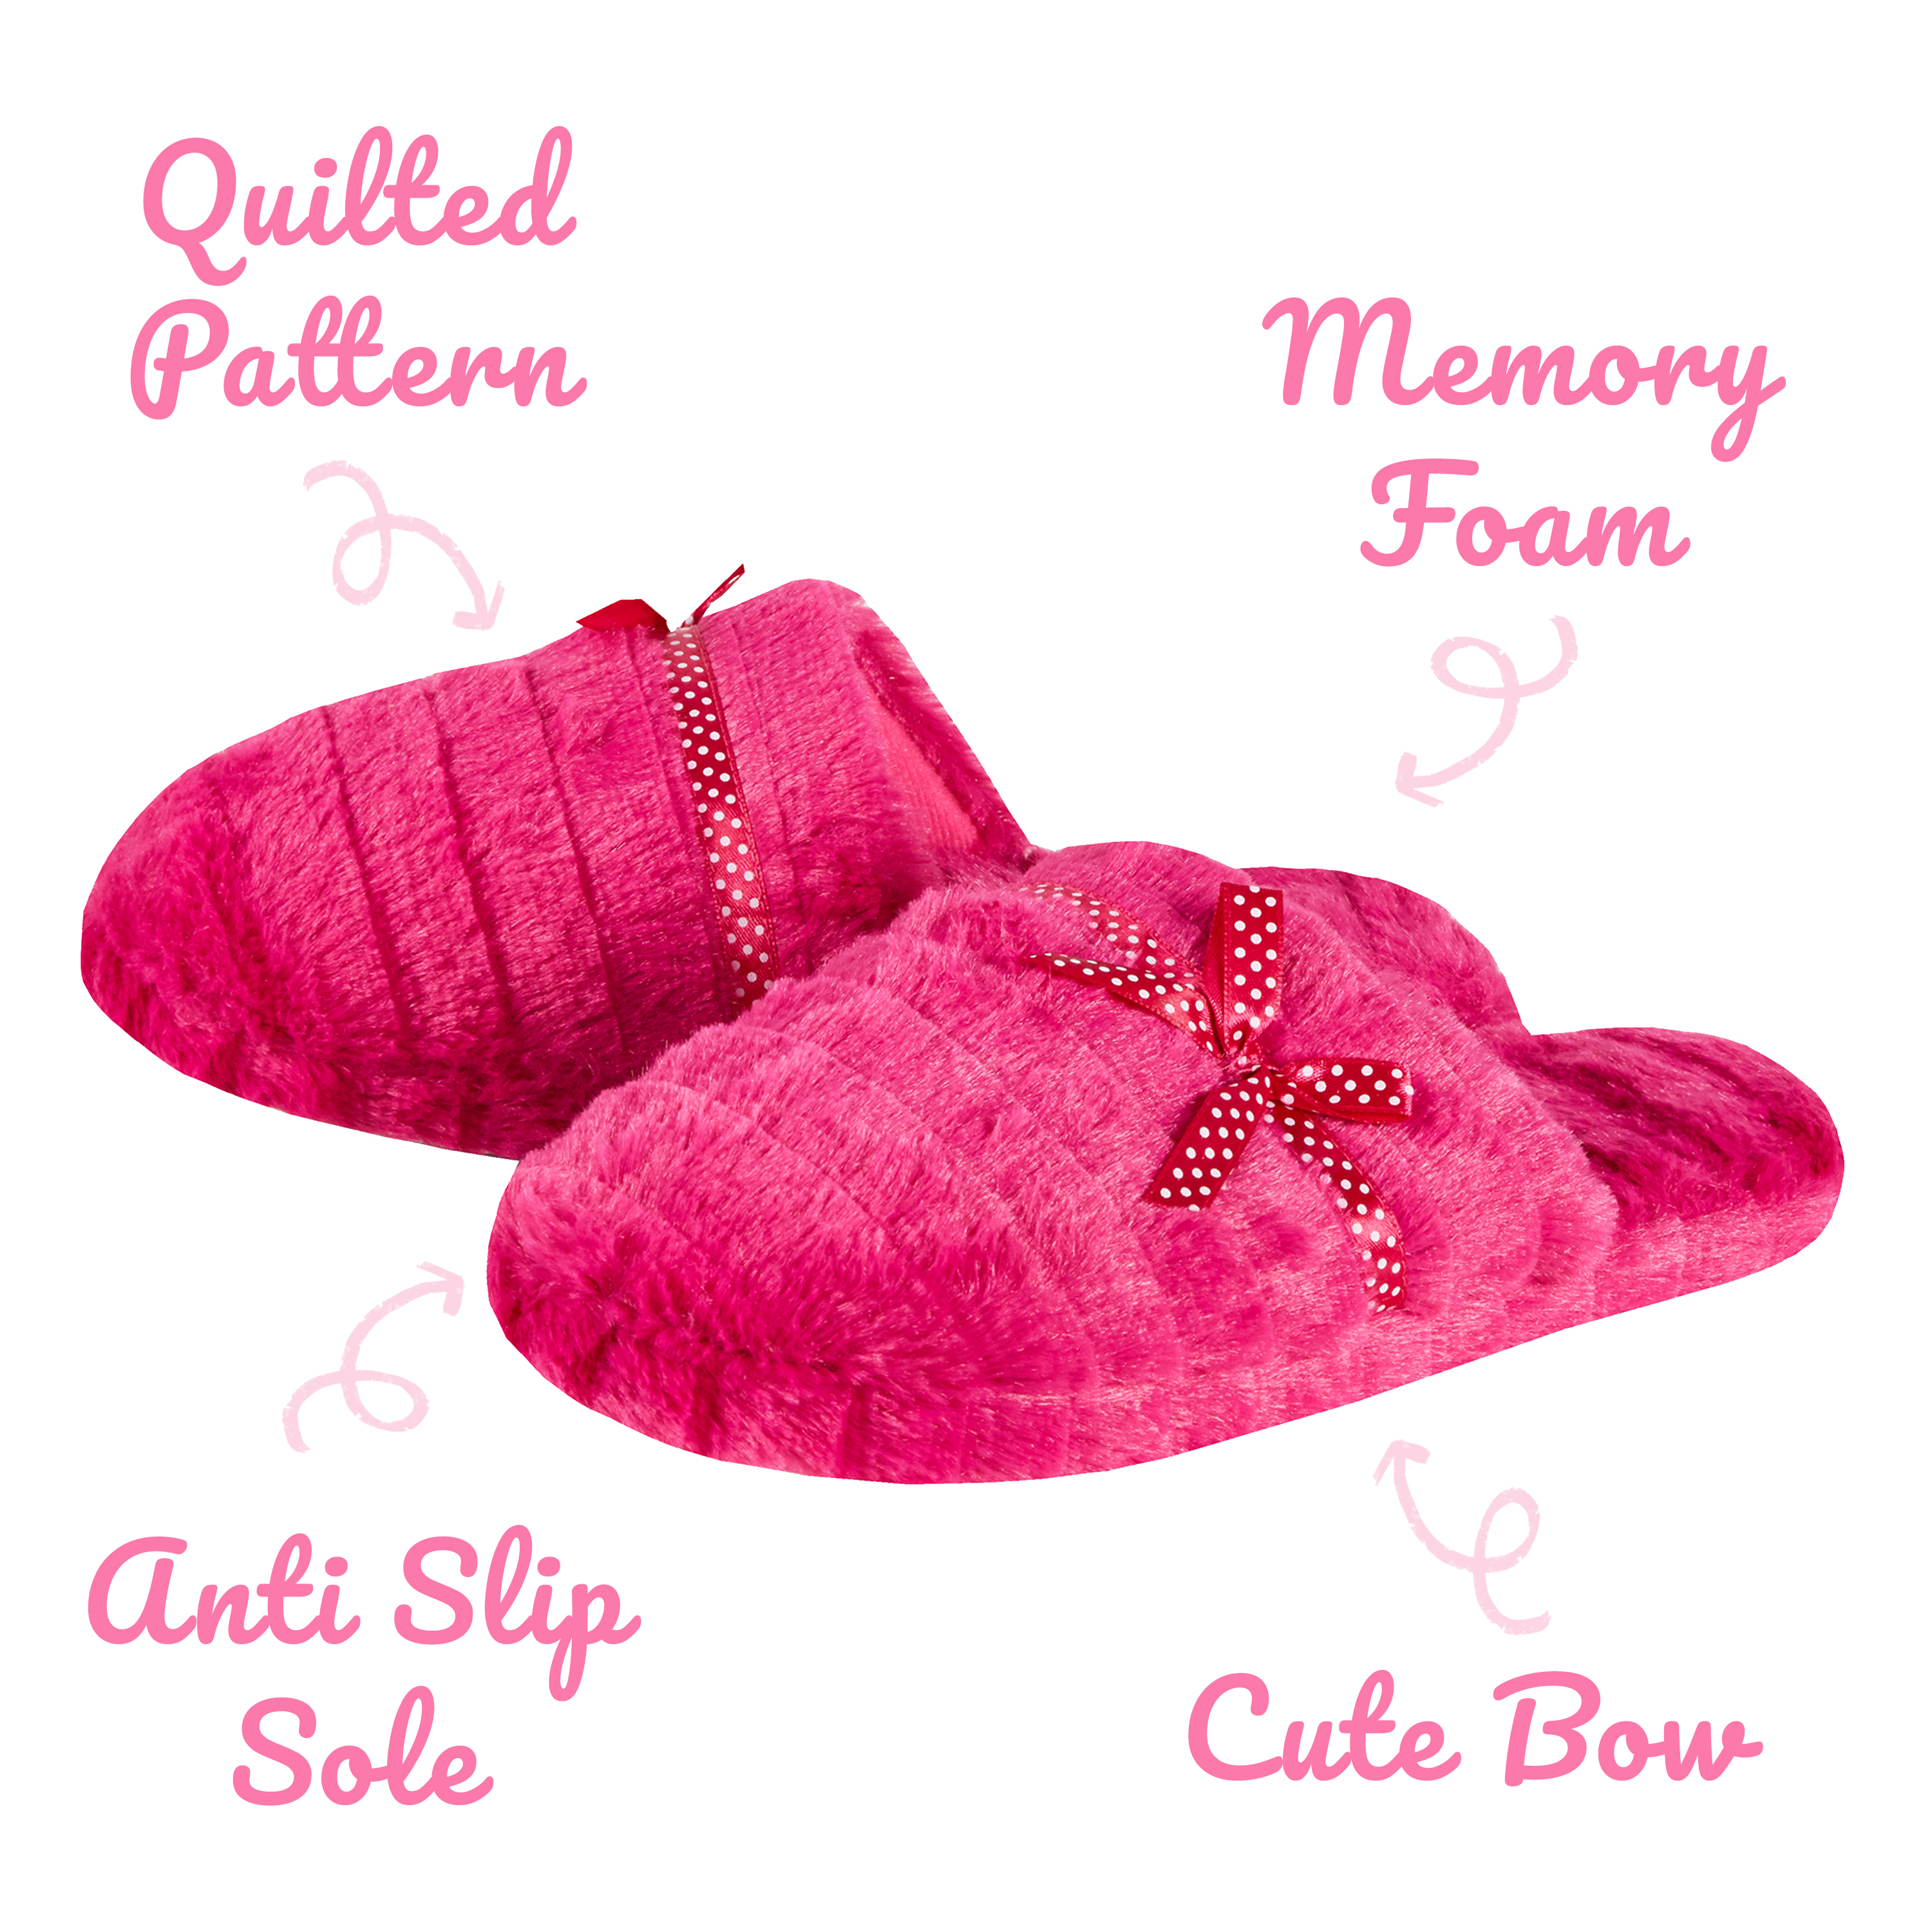 Ladies Womens Memory Foam Slippers House Shoes Anti Slip Sole with Bow Pink Soft